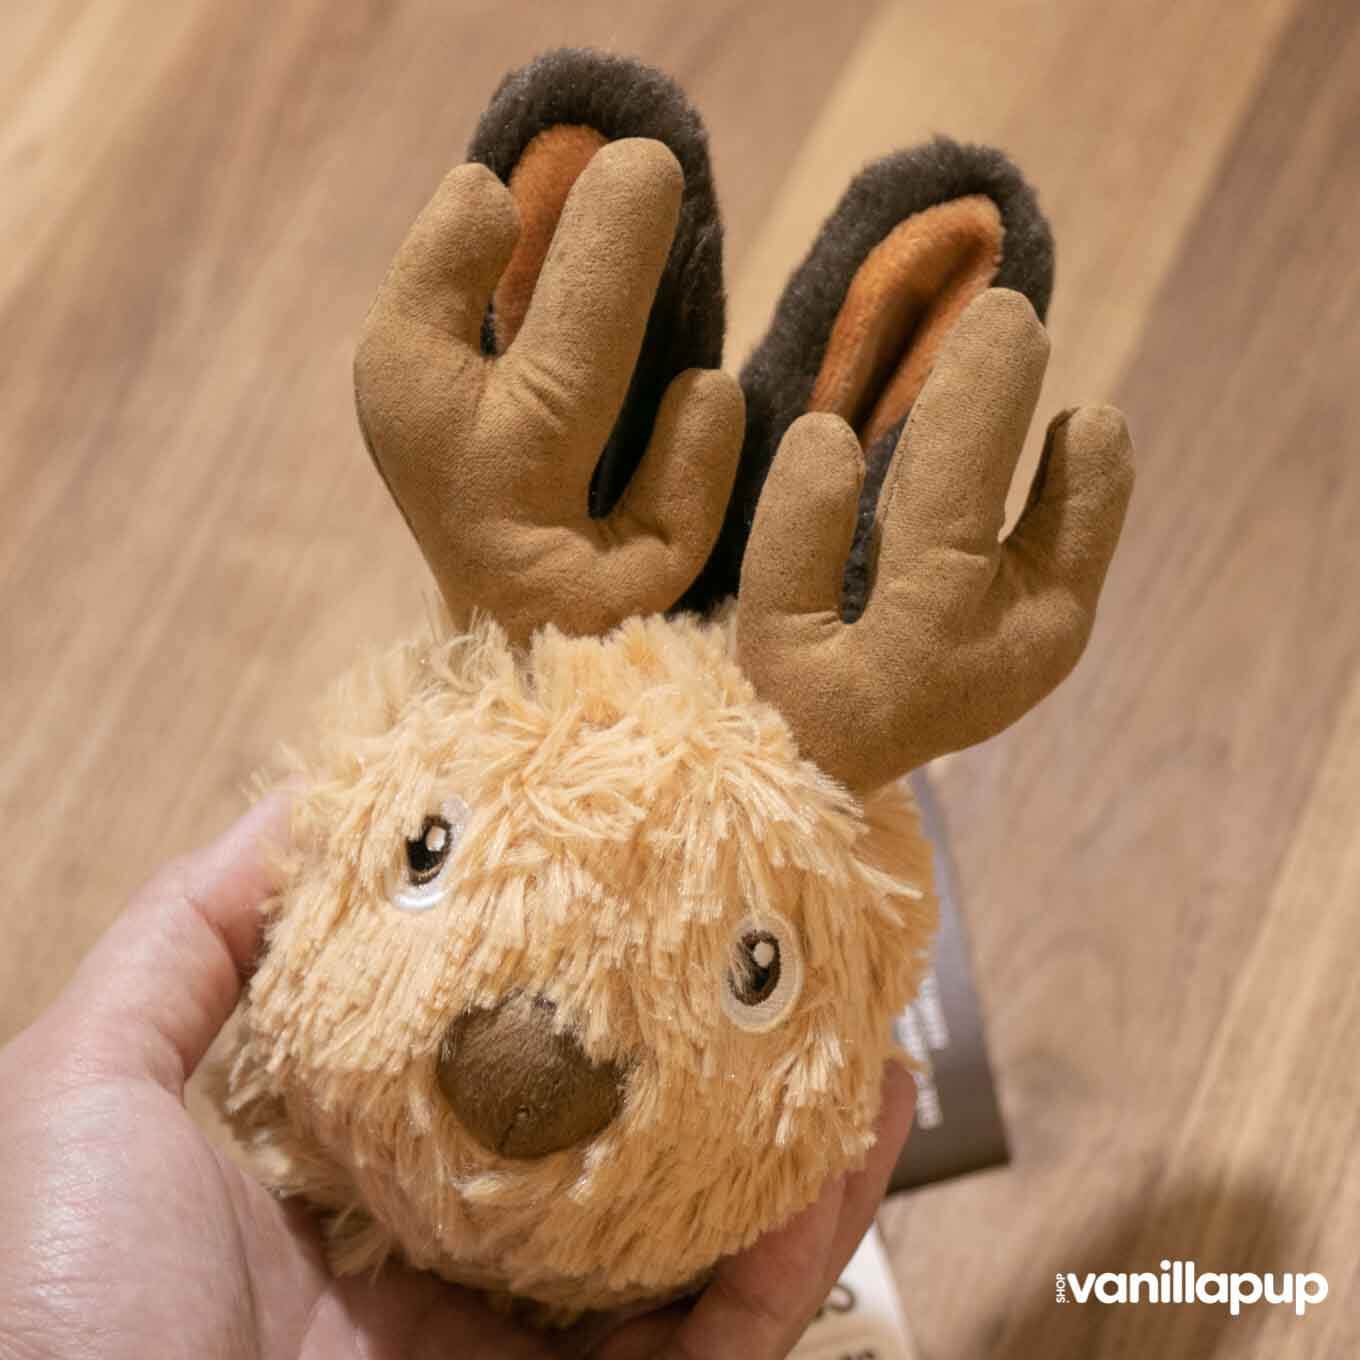 PLAY Willow's Mythical Jackalope Plush Toy - Vanillapup Online Pet Store